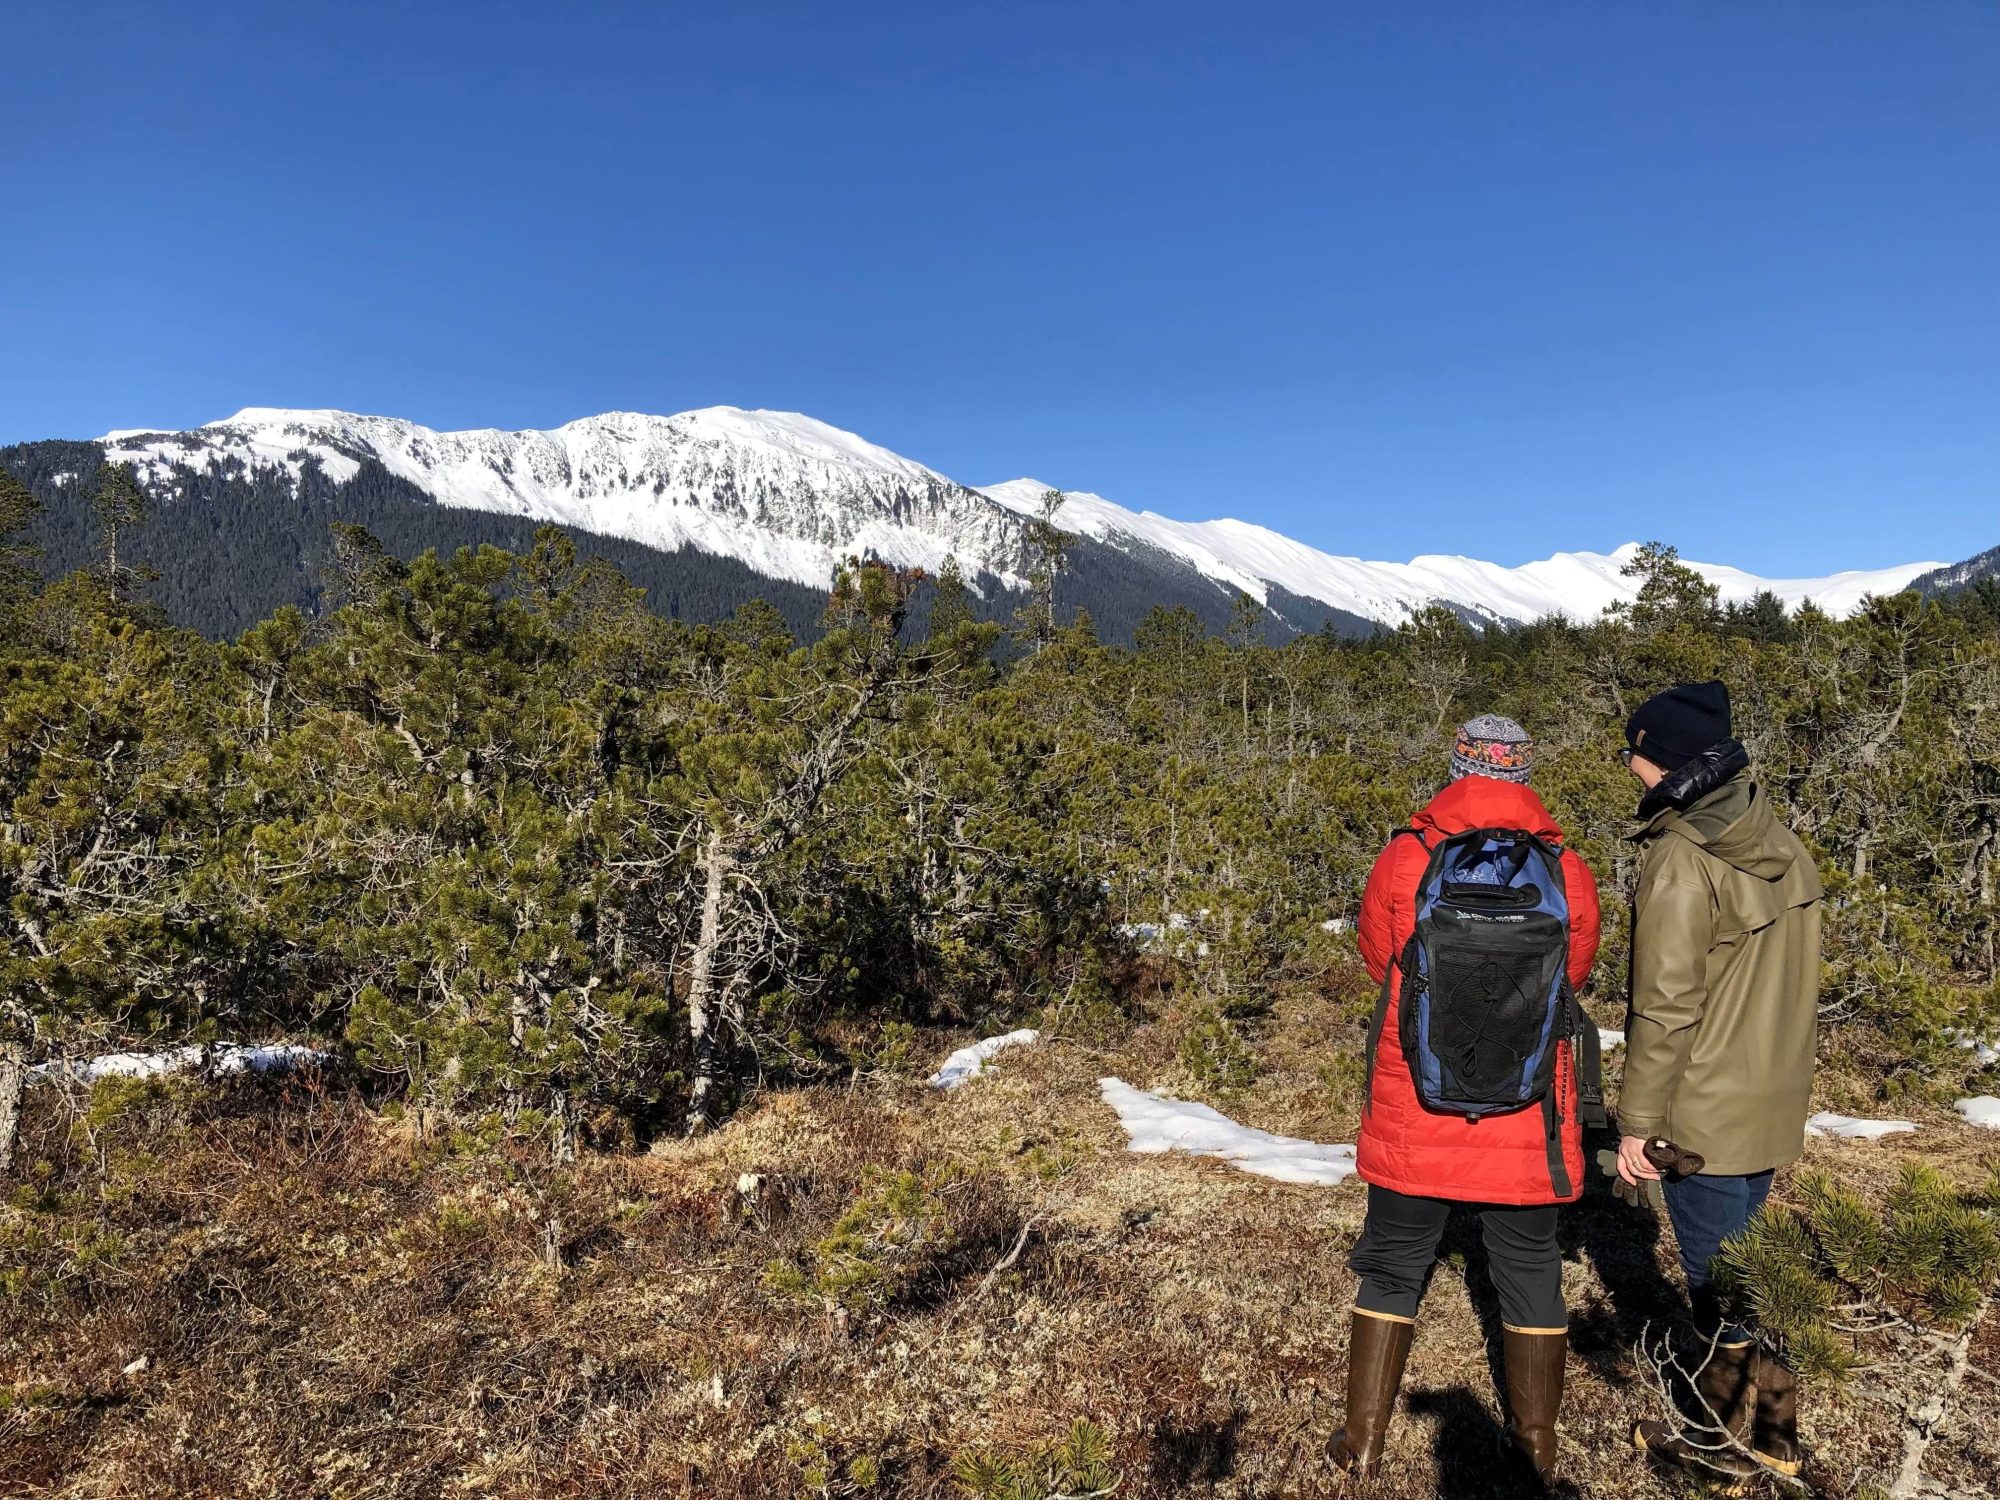 Two people with their backs turned standing in a muskeg with bull pines and snow capped mountains in the background.